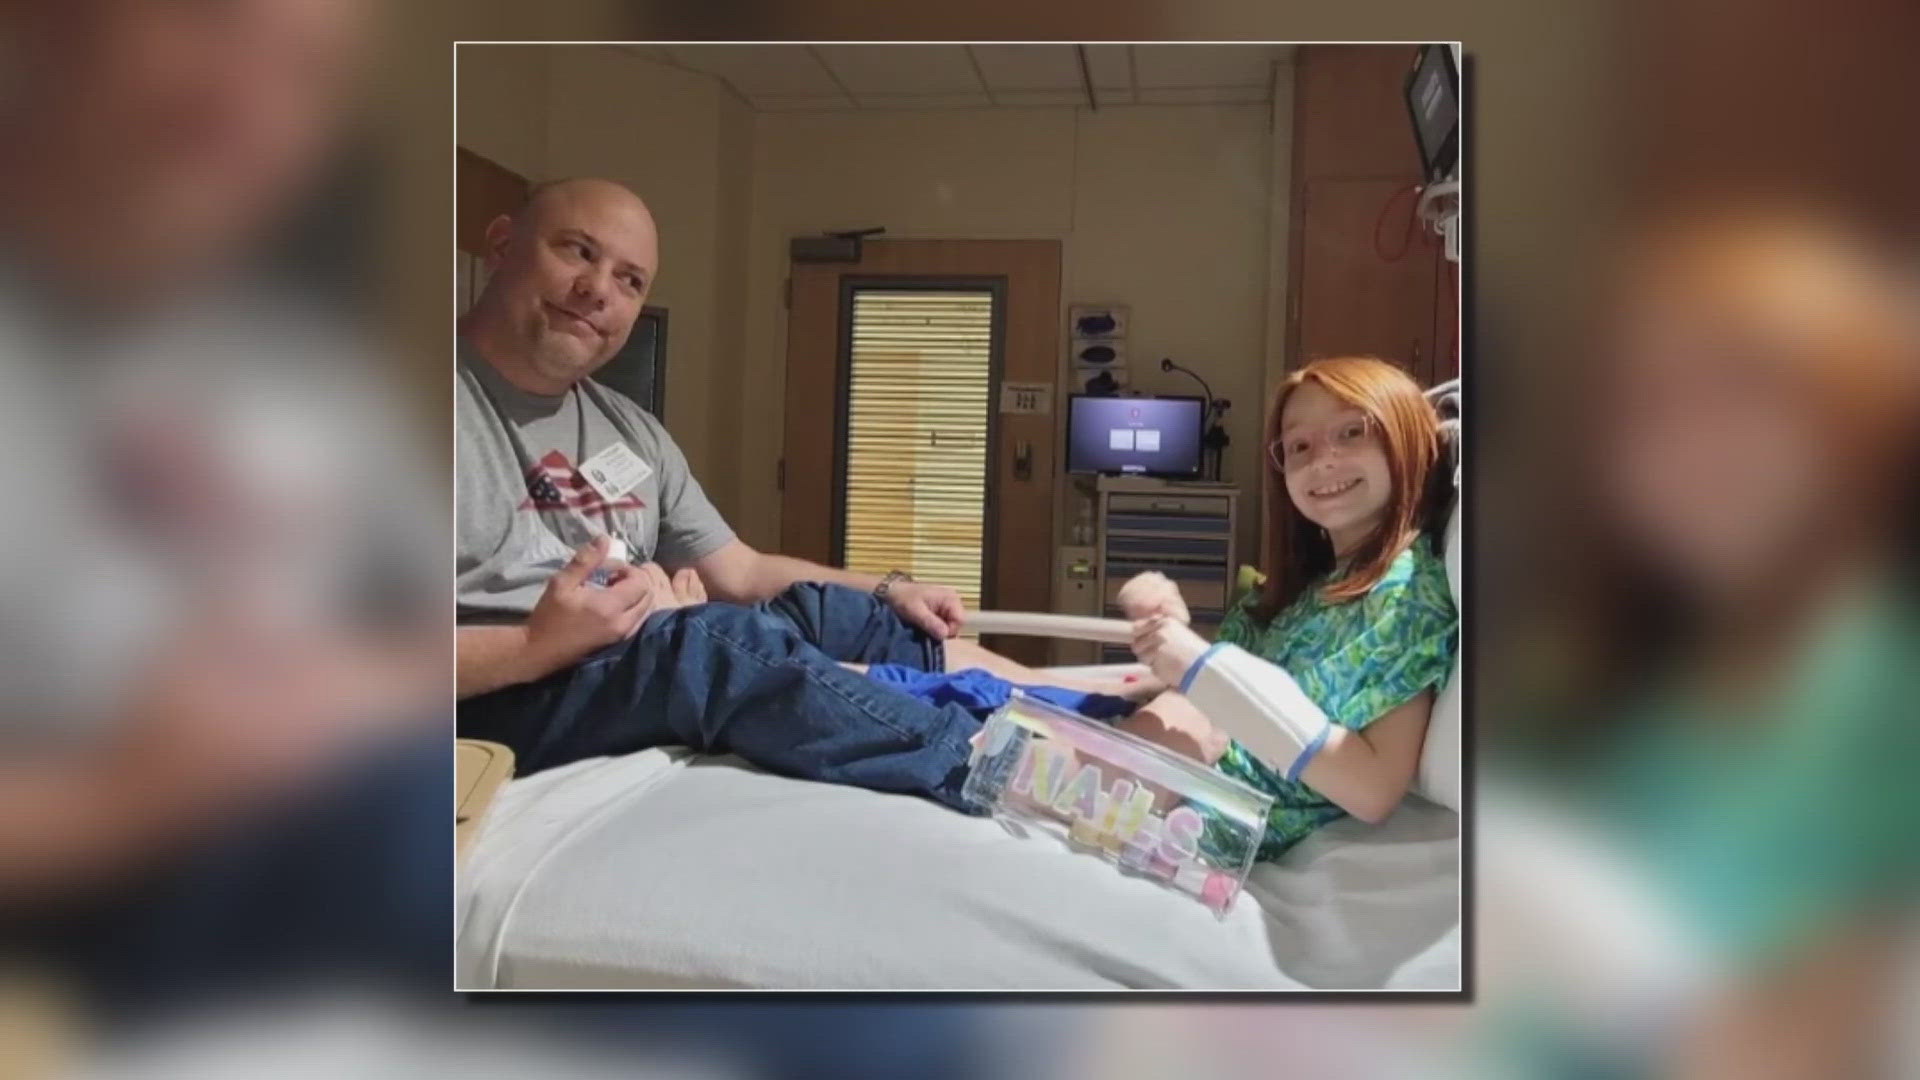 Olivia McKenna, 10, has mid-aortic syndrome and a connective tissue disorder, while her dad, Michael, has stage 4 pancreatic cancer.